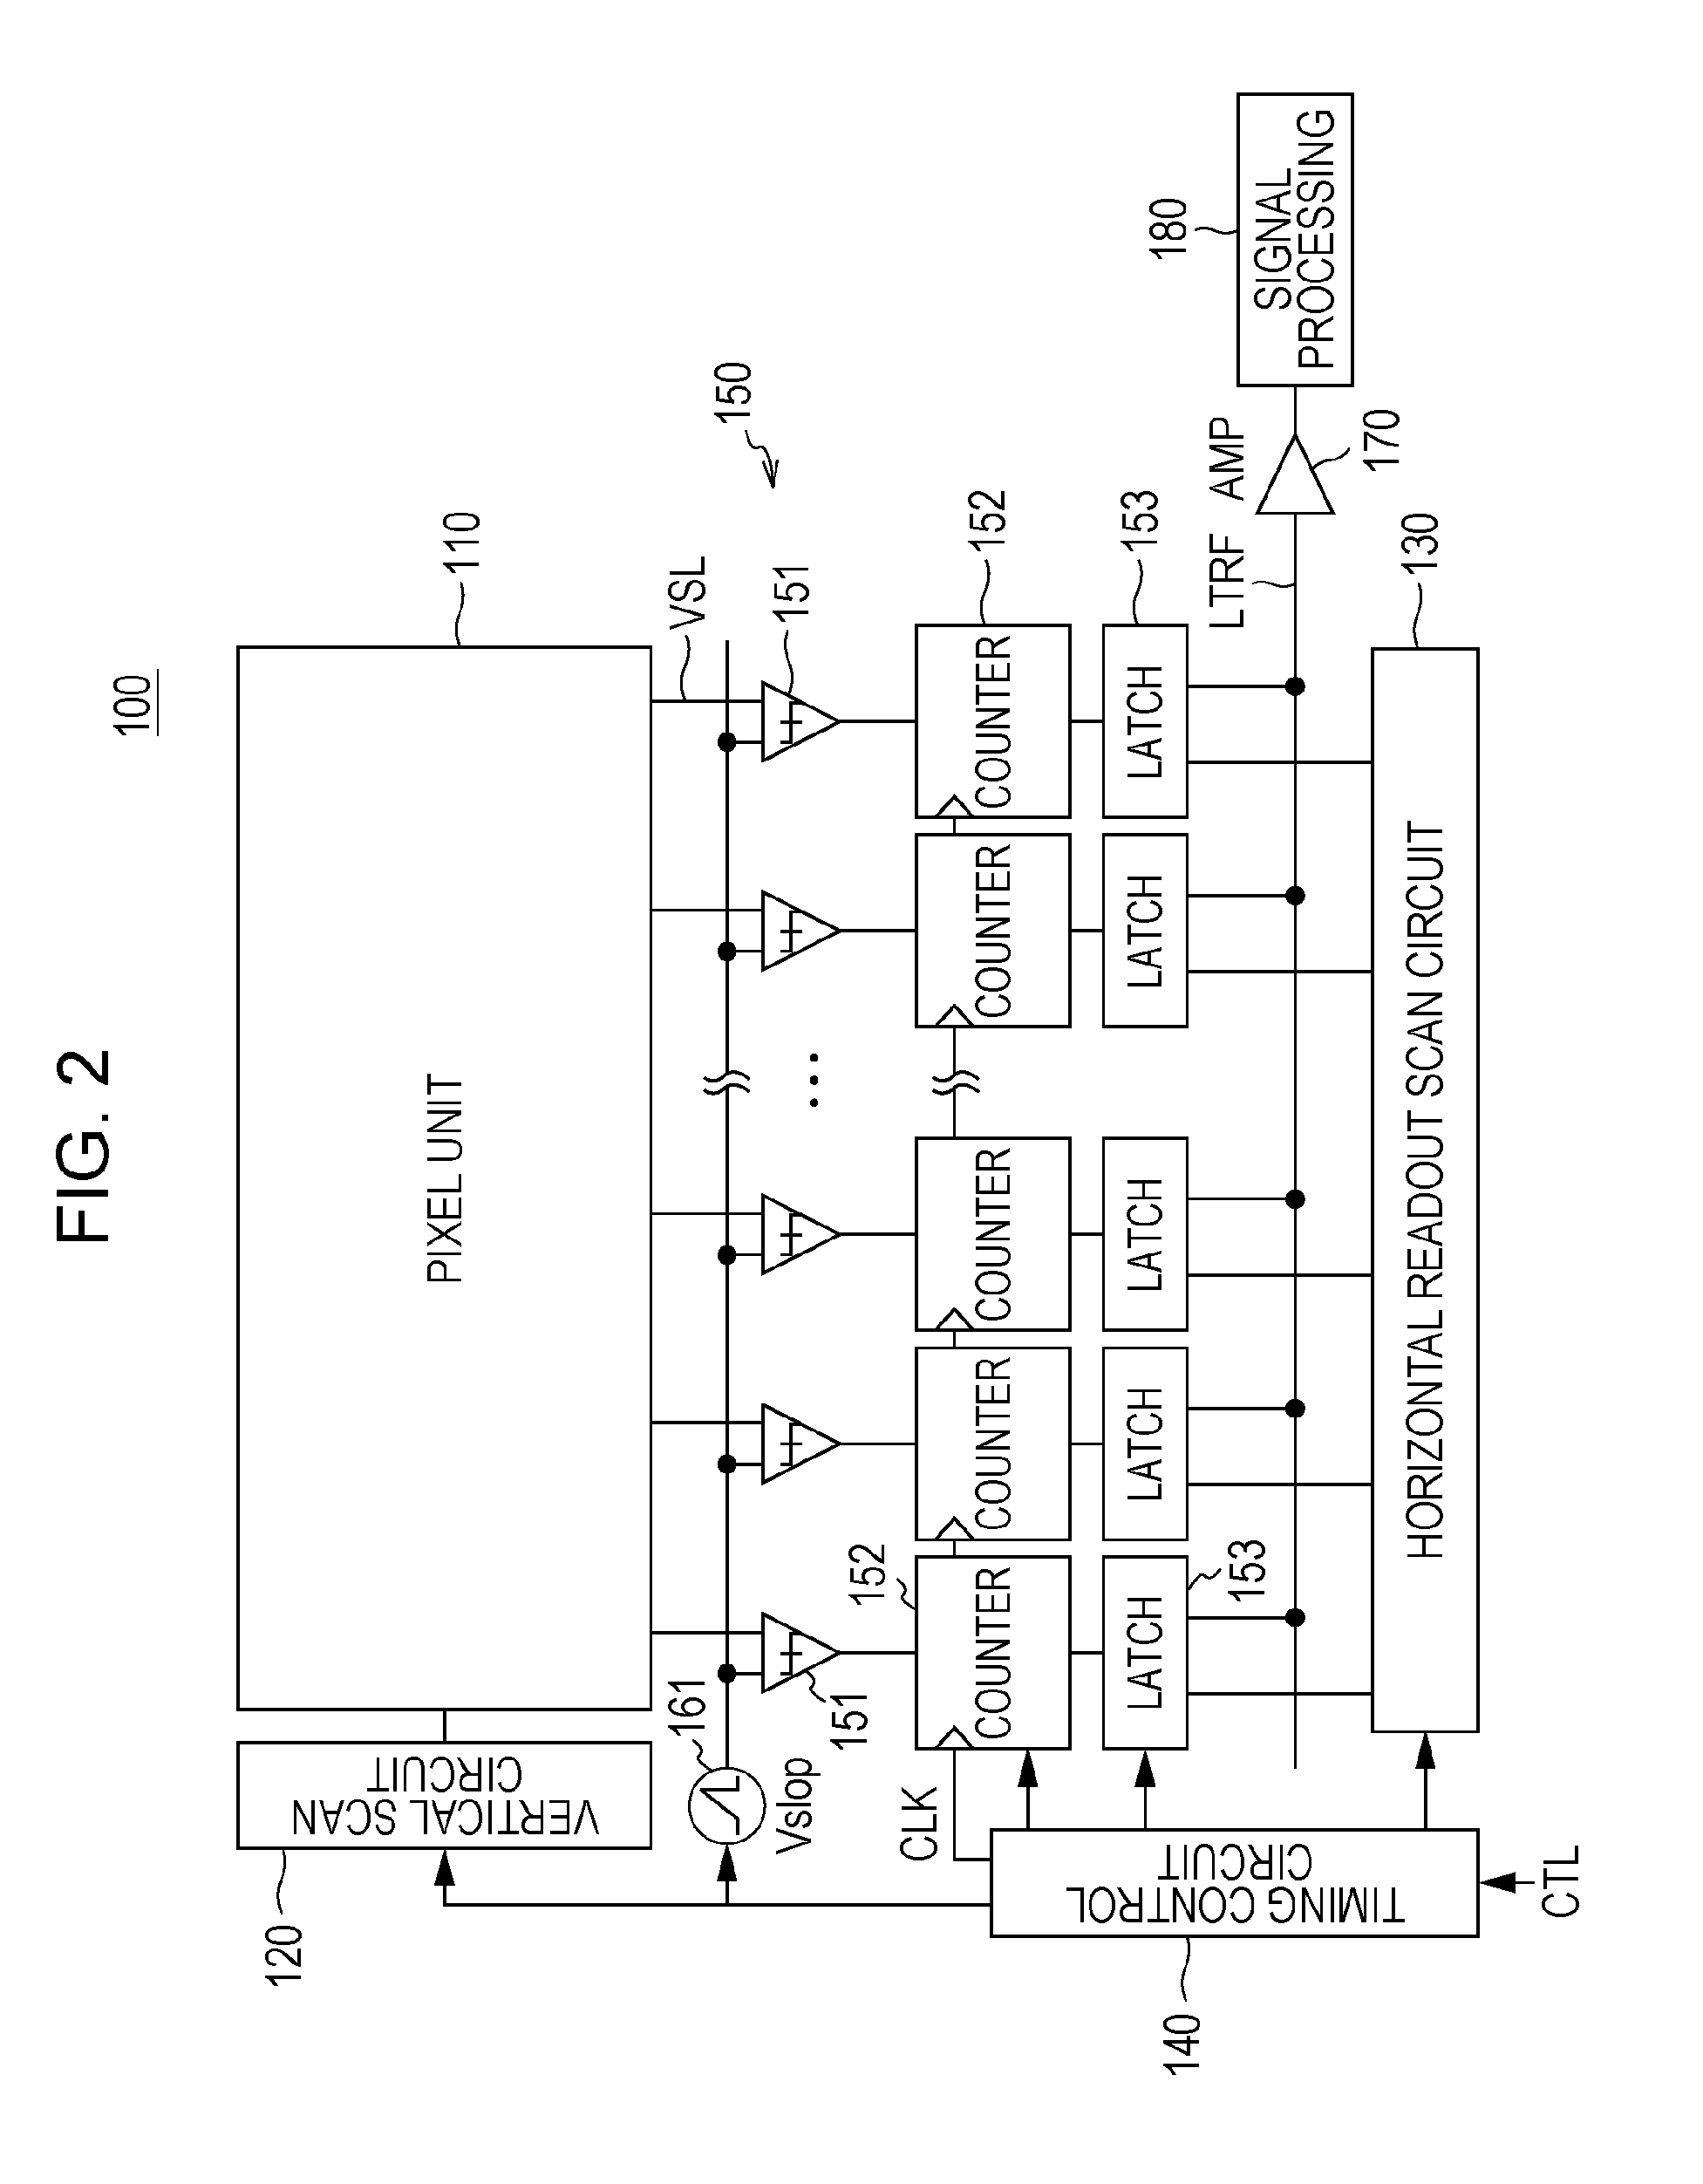 Solid-state image sensor and camera system